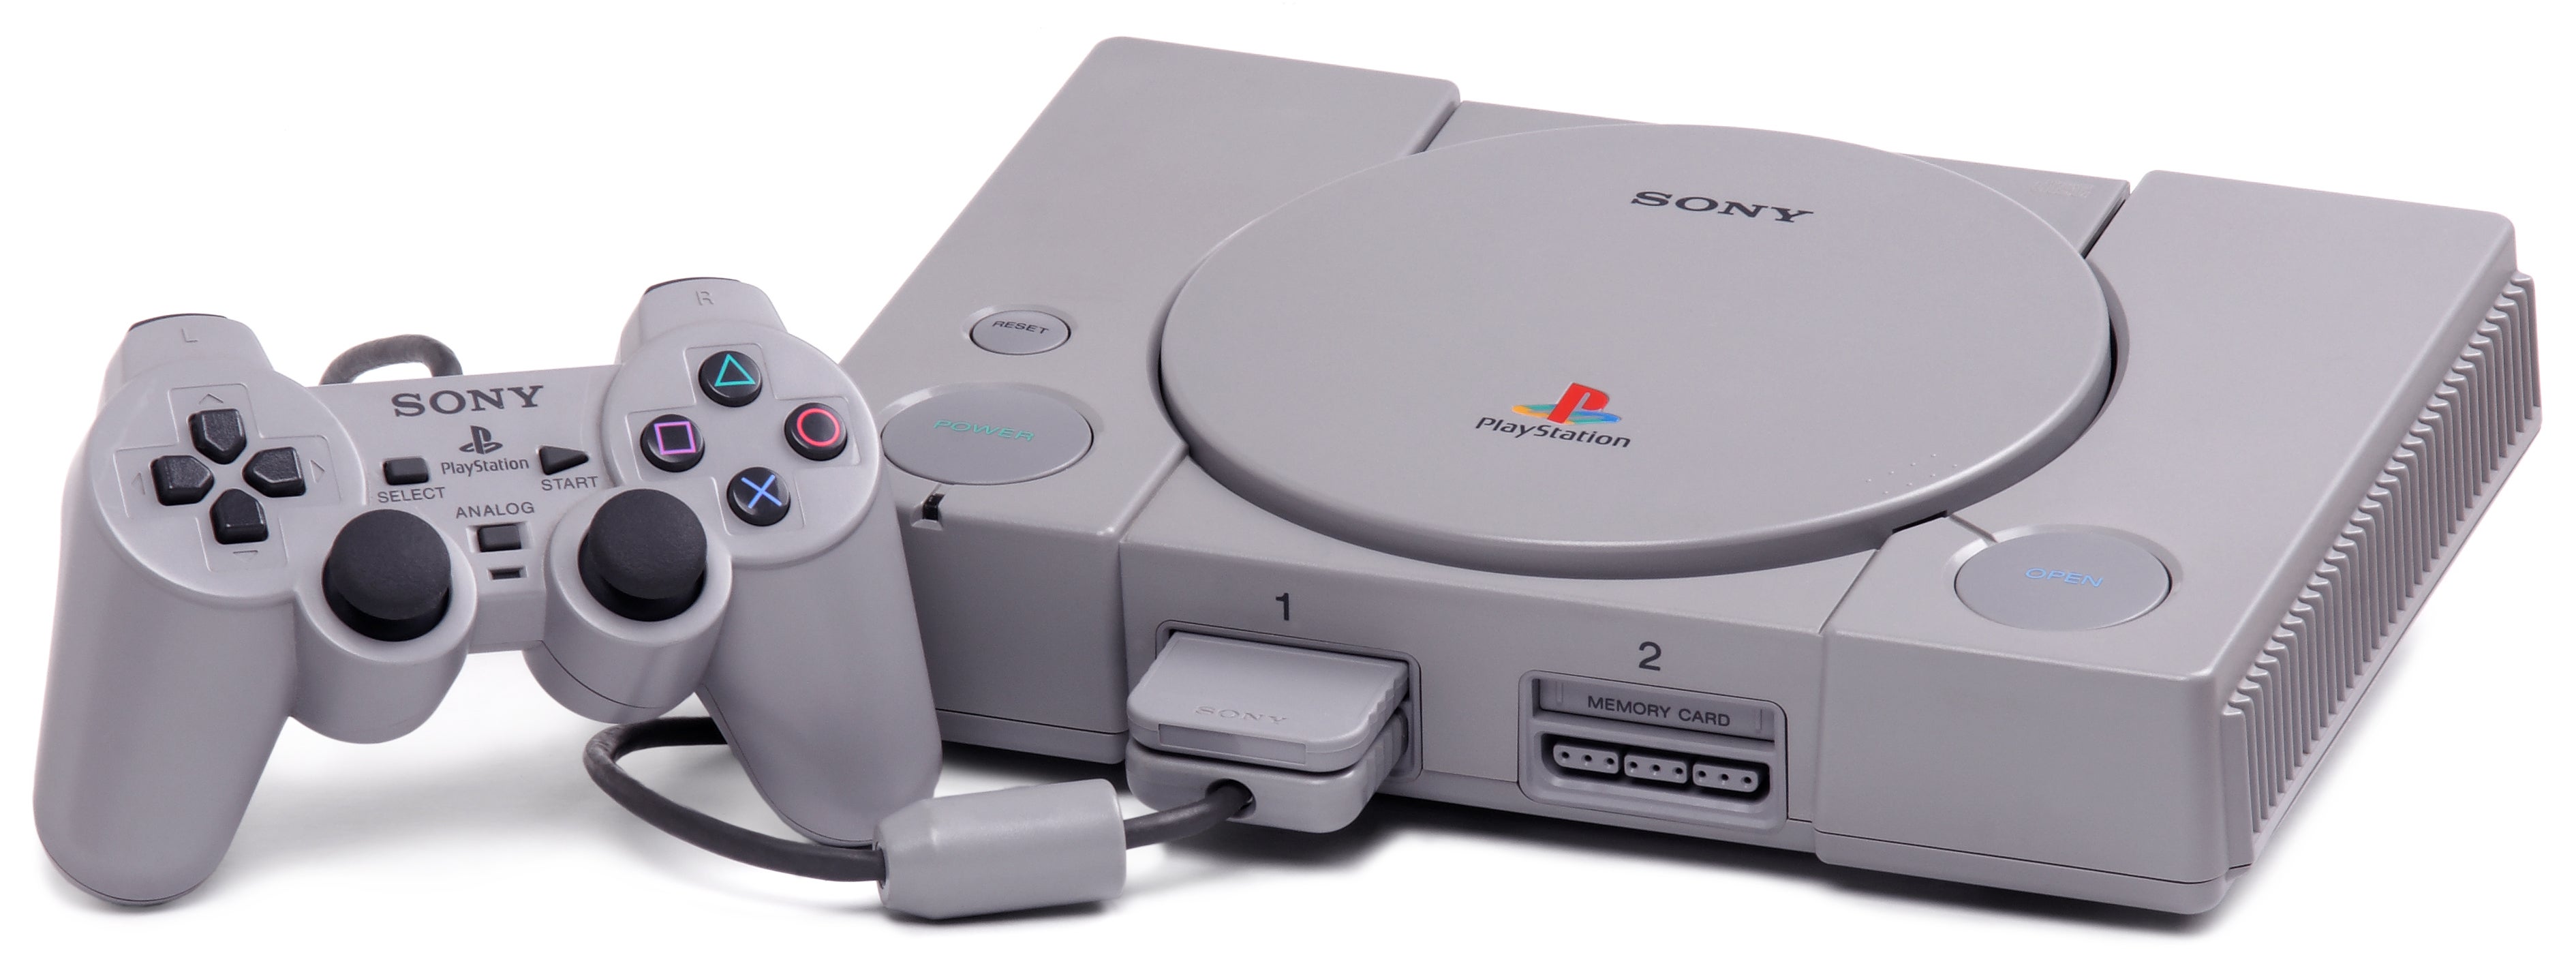 Image for The PlayStation Classic Invites a Renewed Examination of the PS1's RPG Legacy